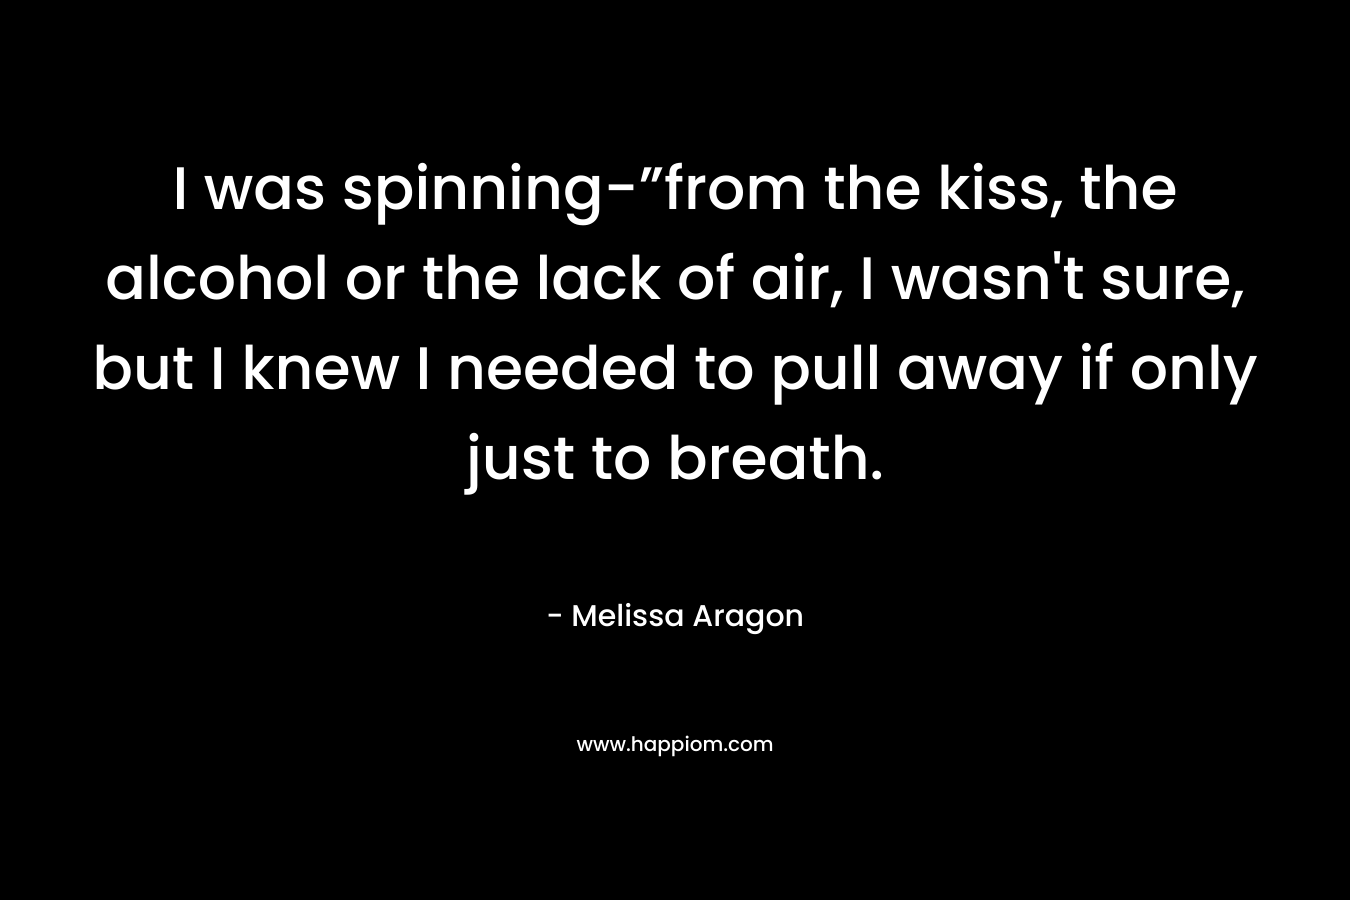 I was spinning-”from the kiss, the alcohol or the lack of air, I wasn’t sure, but I knew I needed to pull away if only just to breath. – Melissa Aragon